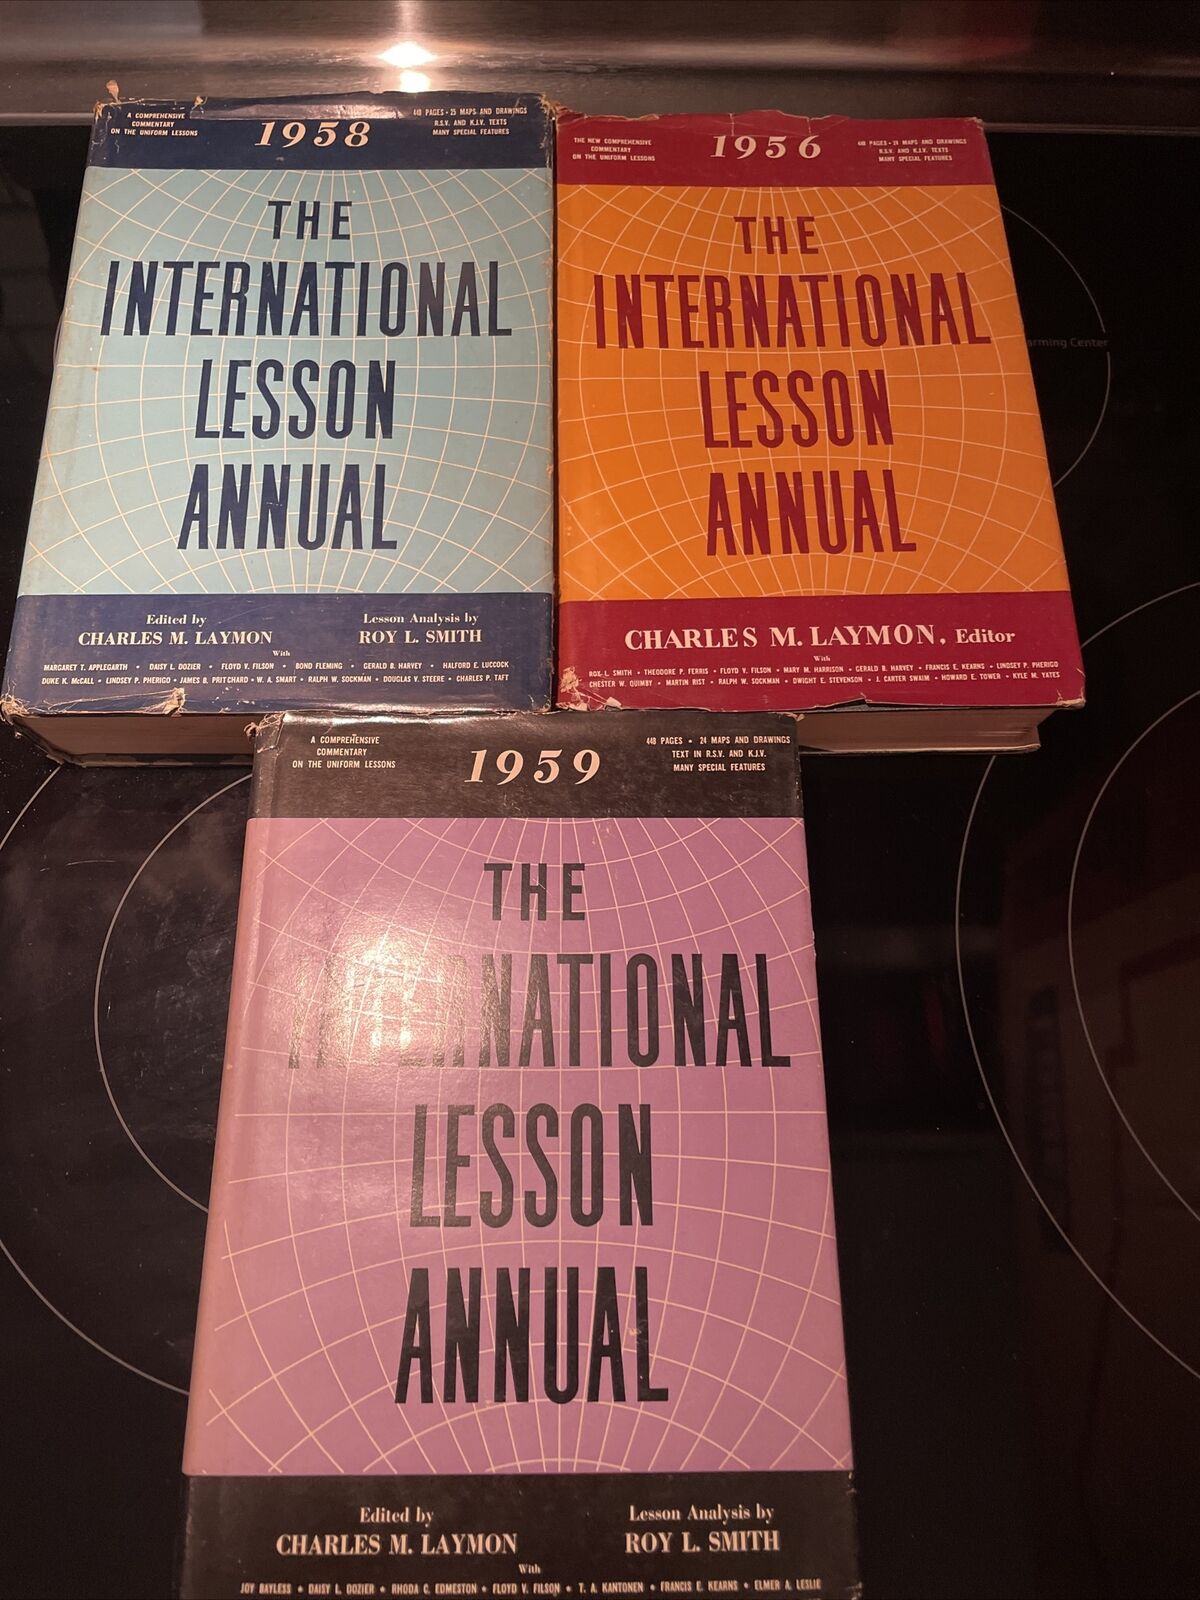 The International lesson Annual 1956 1958 & 1959 lot of 3 by Charles Laymon